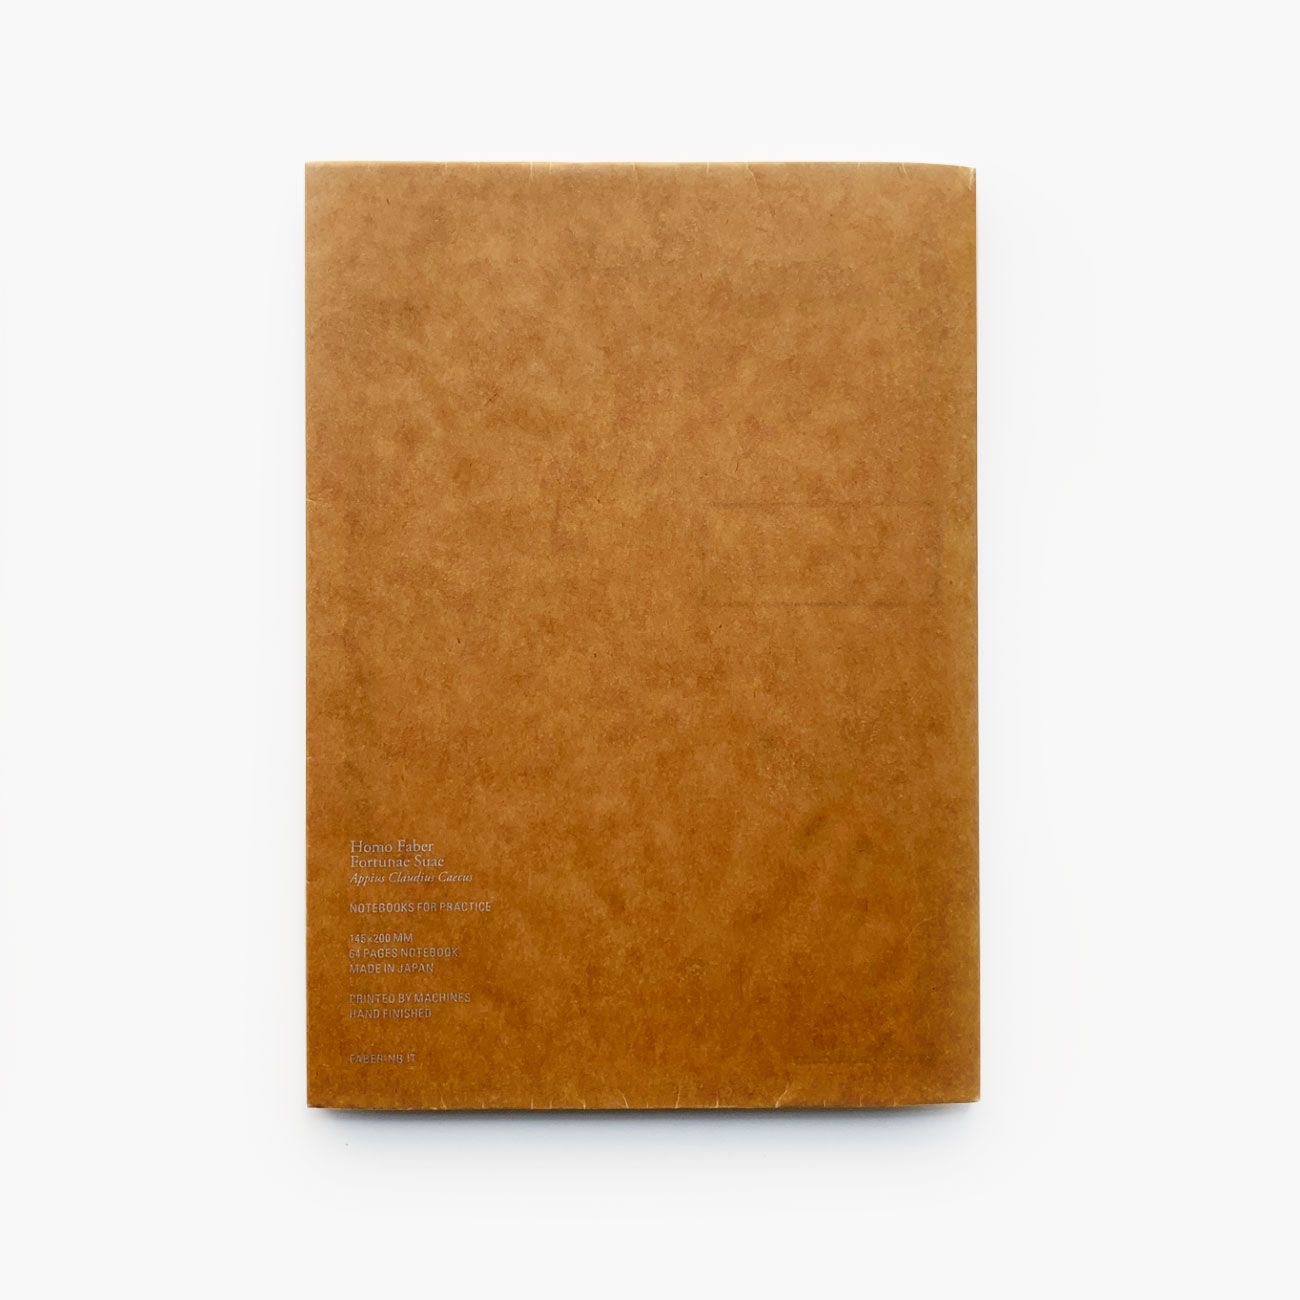 FABER Notebook – A WHITE PAGE